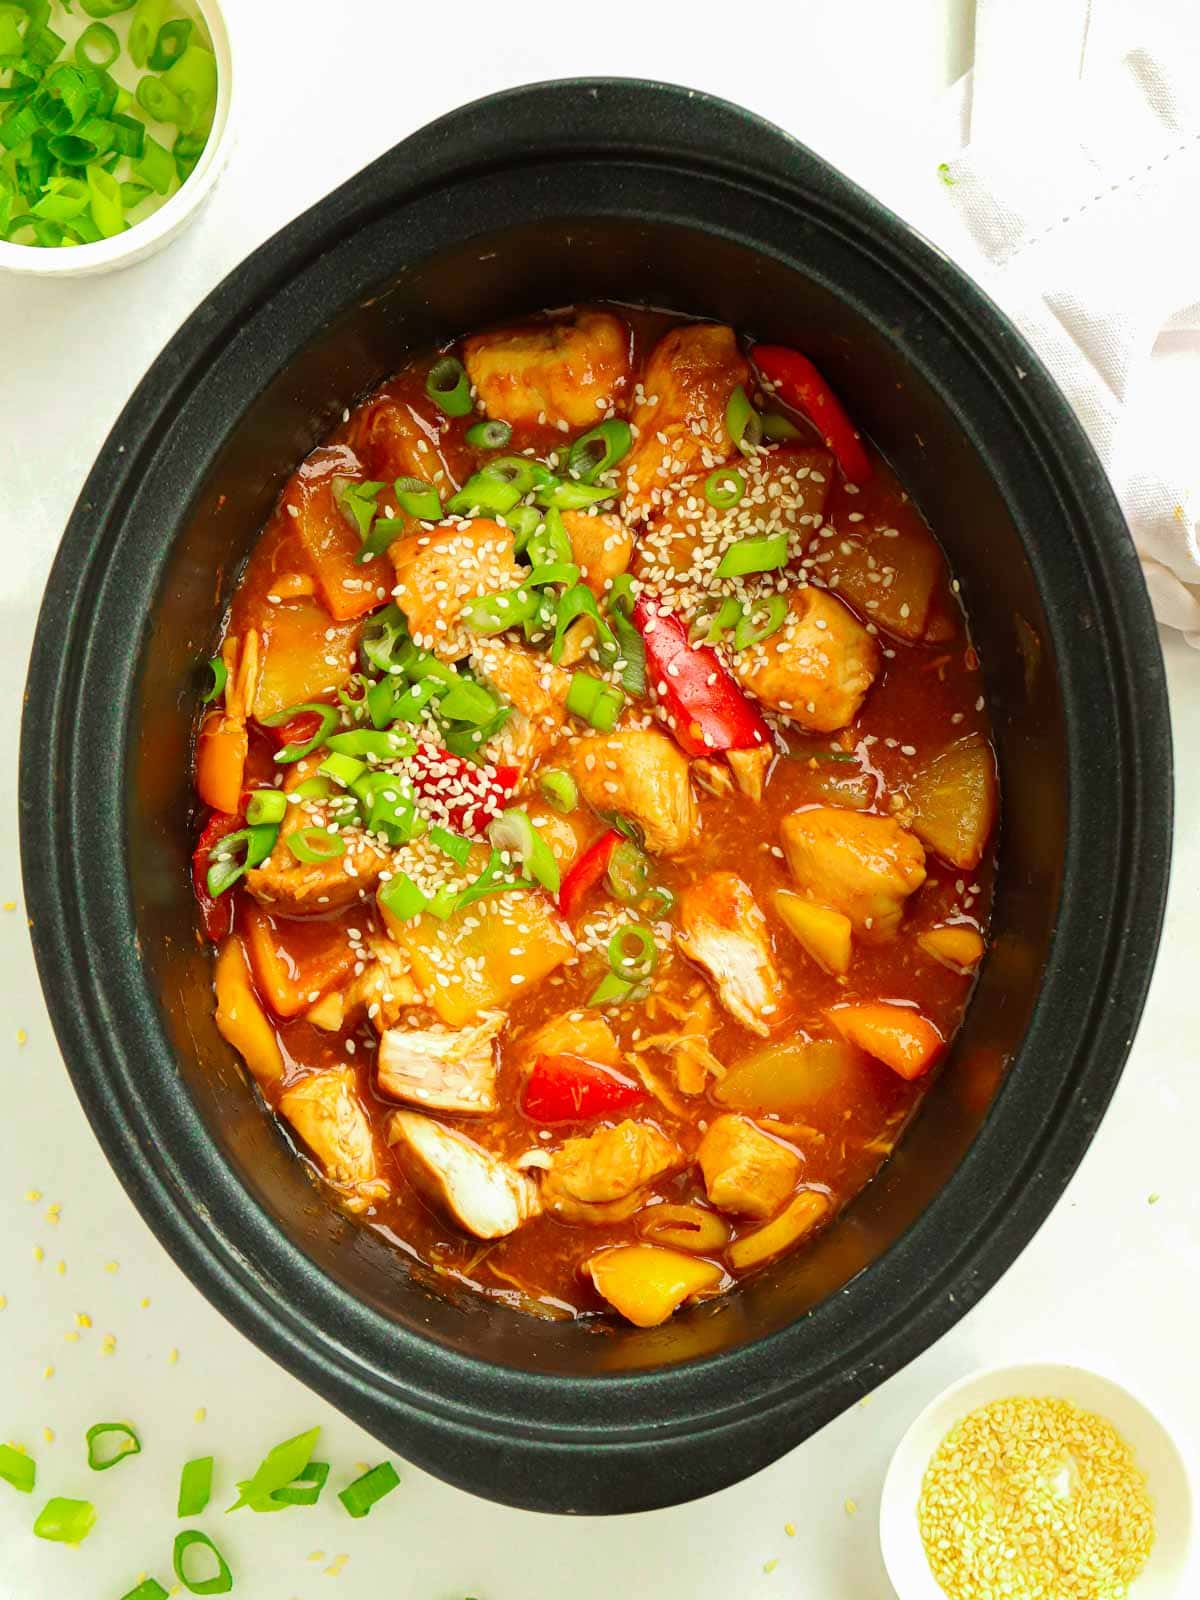 Finish pan of Sweet and Sour Chicken in the Slow Cooker with the lid off.